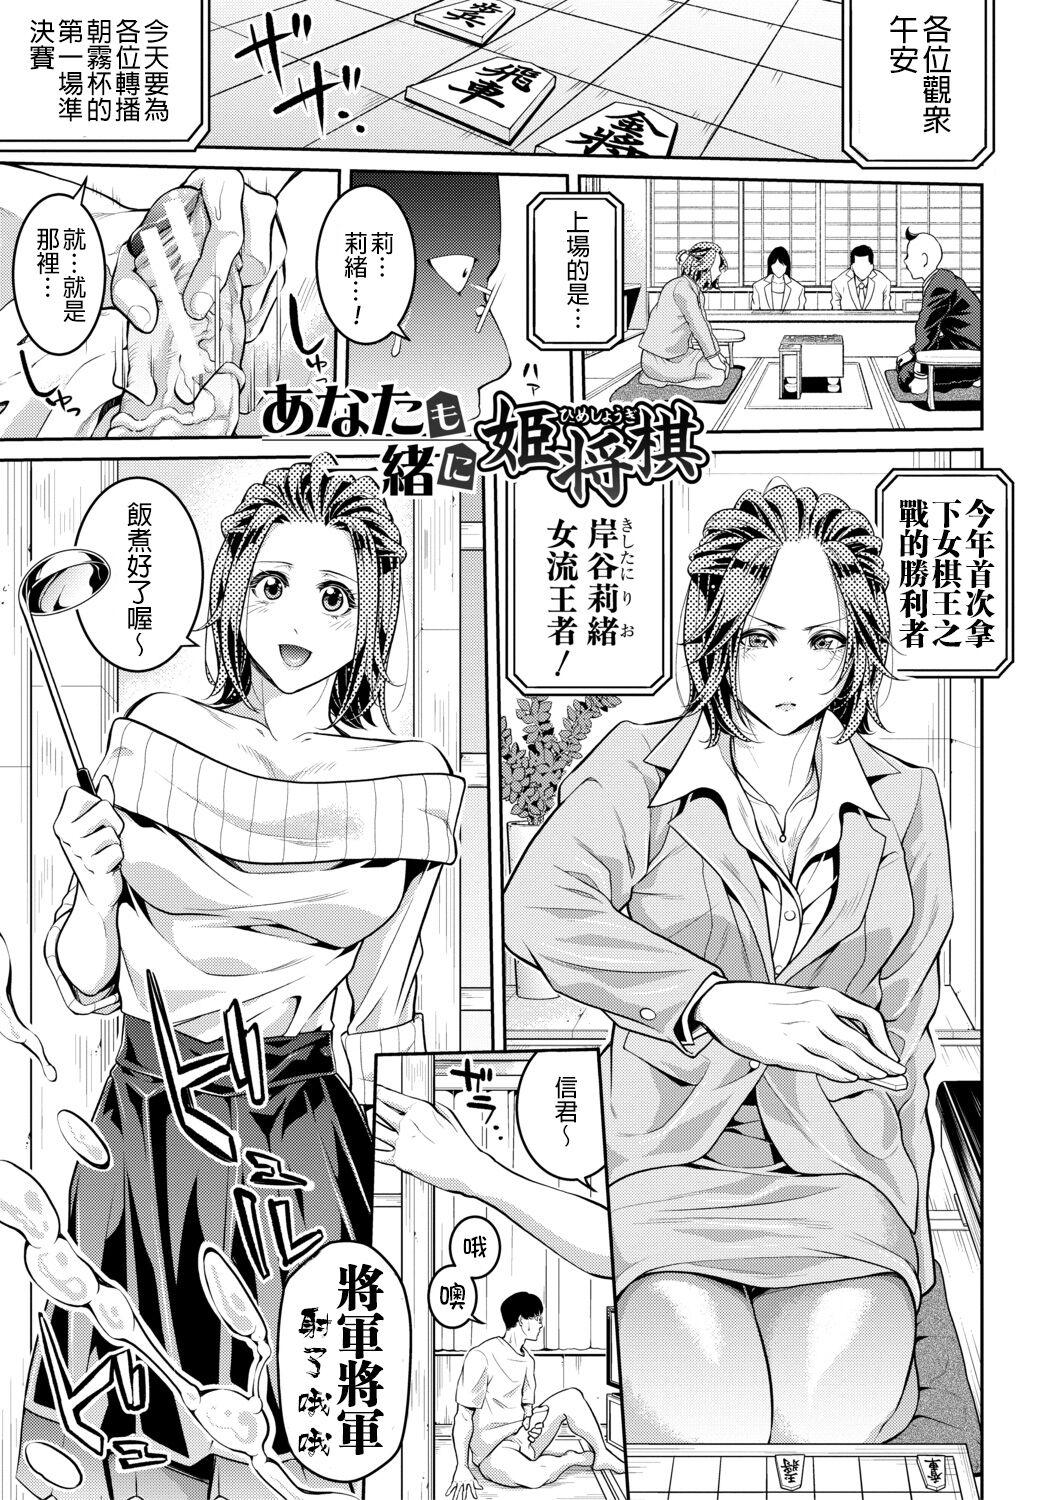 [Brother Pierrot] Onee-san to Ase Mamire Ch. 1-5 [Chinese] [Digital] 87